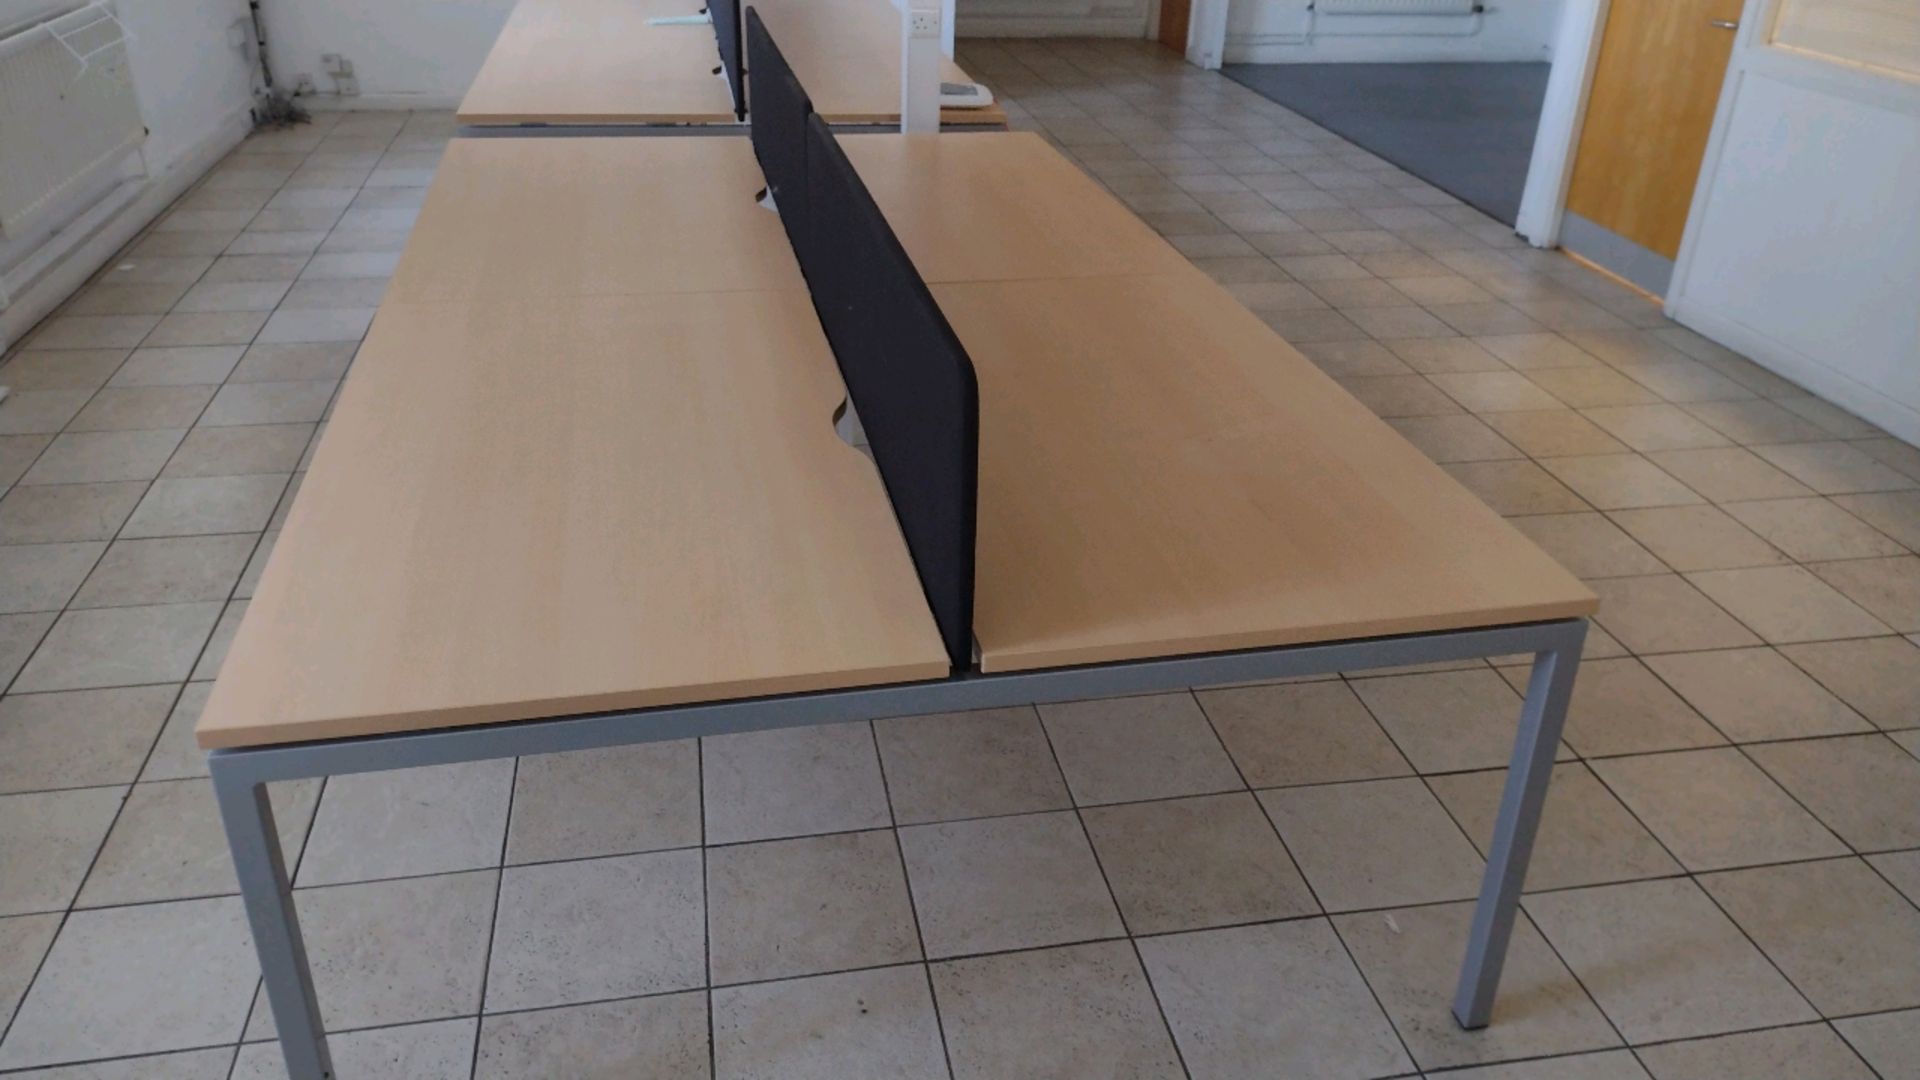 4x Office Desk With Central Divide - Image 2 of 6